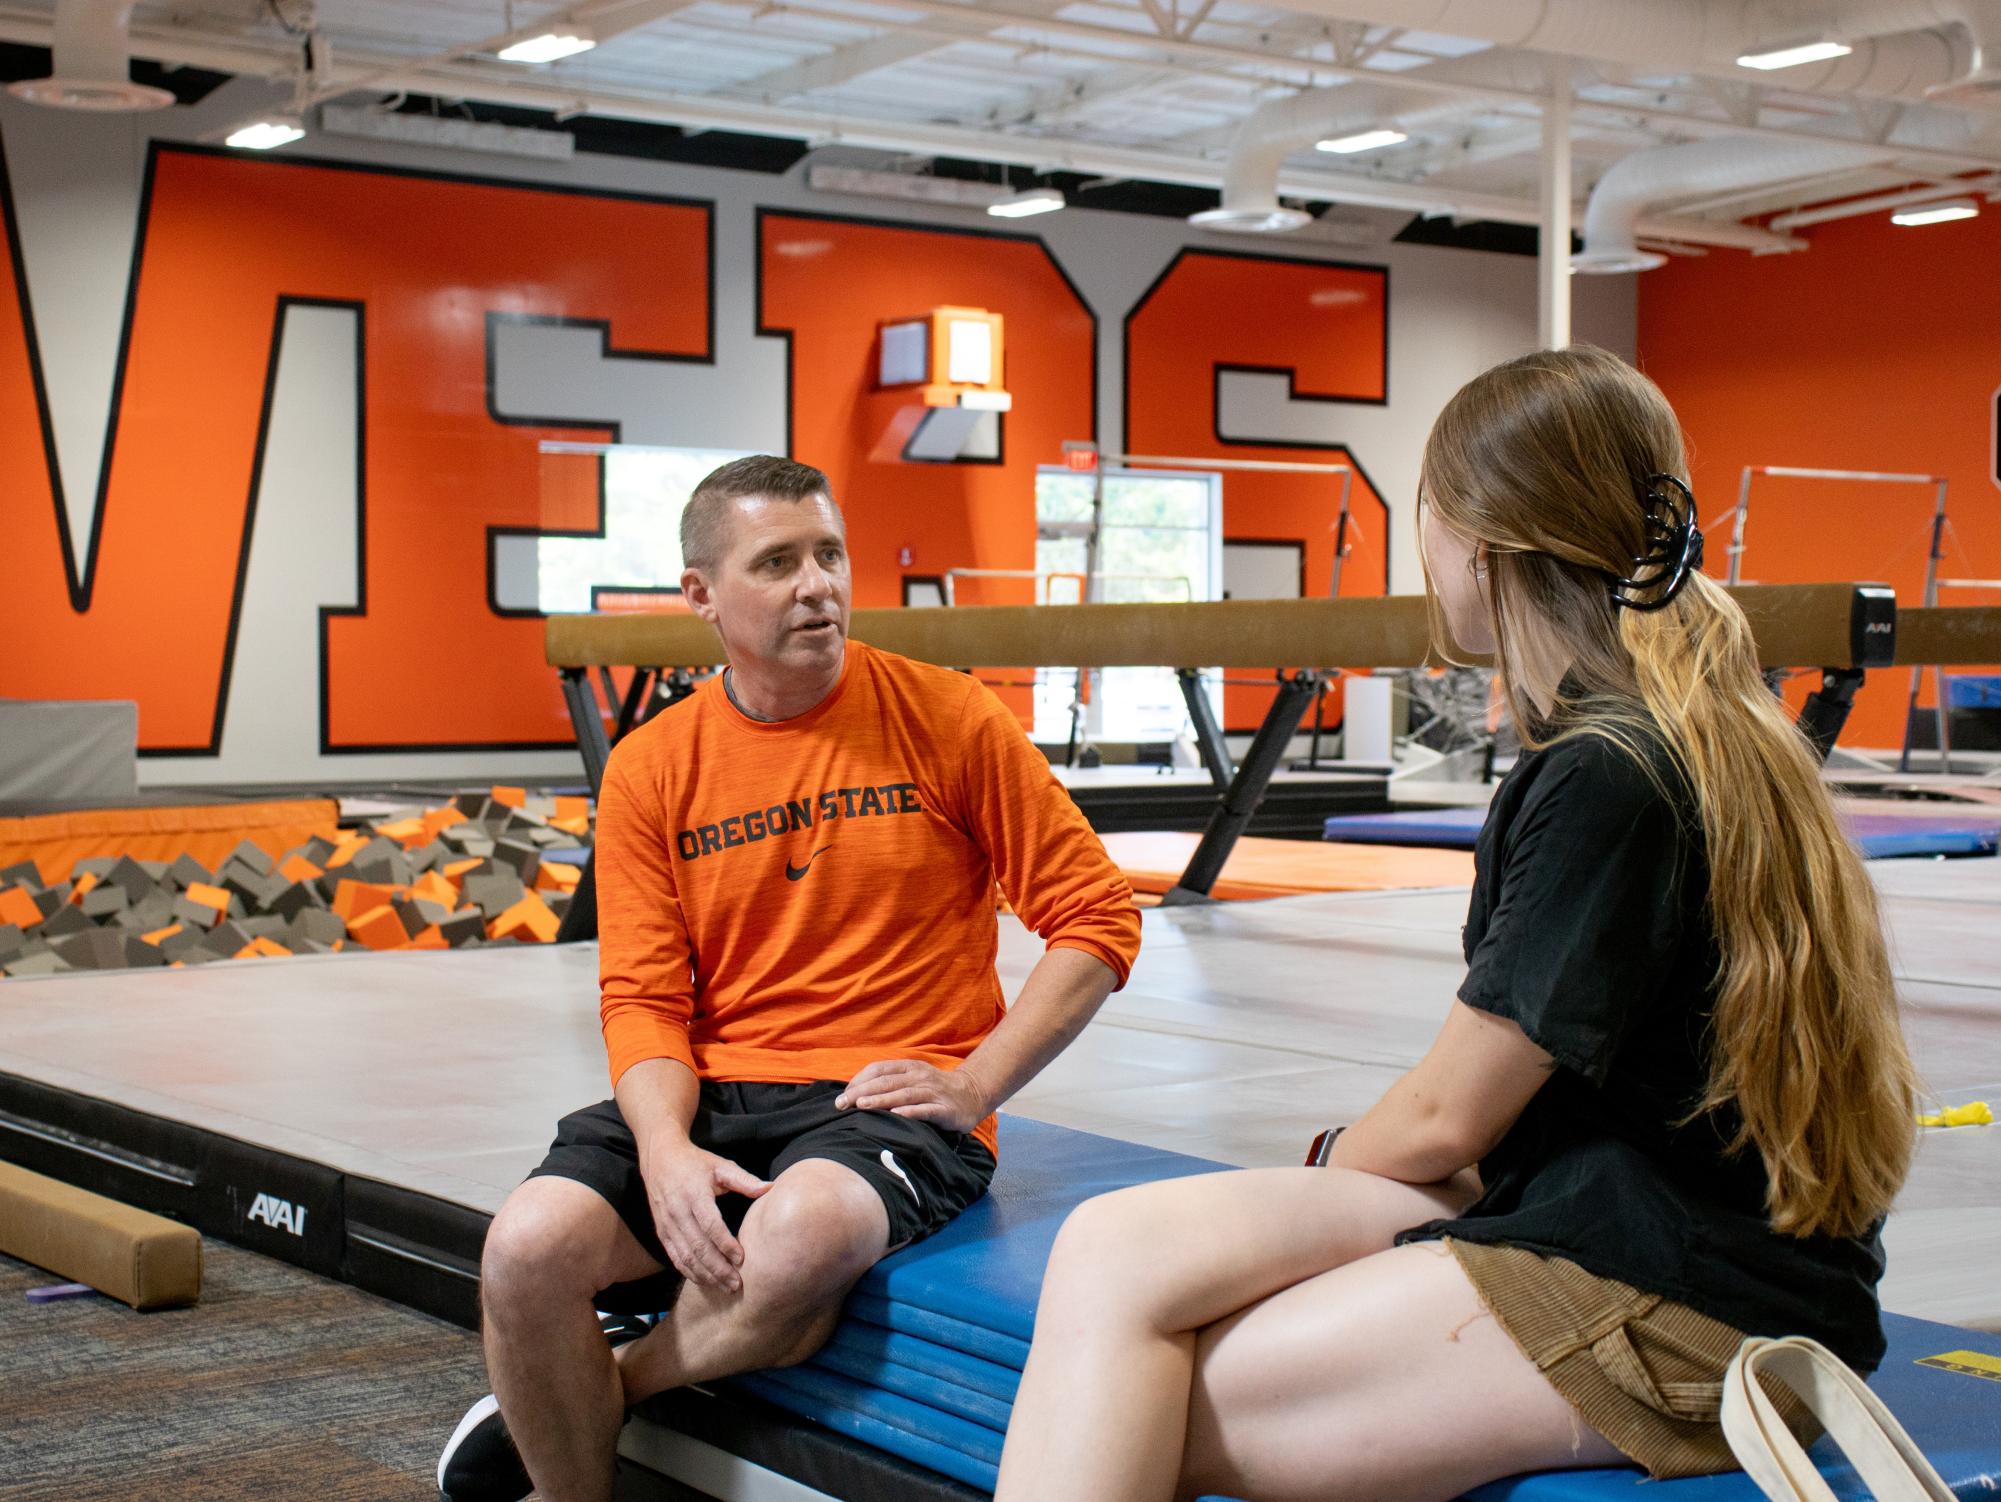 Oregon State gymnastics coach Brian Carey (left) speaks with third-year Kinesiology major Riley LeCocq (right) about his plans for the season in the Gymnastics Practice Facility on August 11 2023. Carey, recently hired, is the father of third-year gymnast Jade Carey and has coached for Team USA.